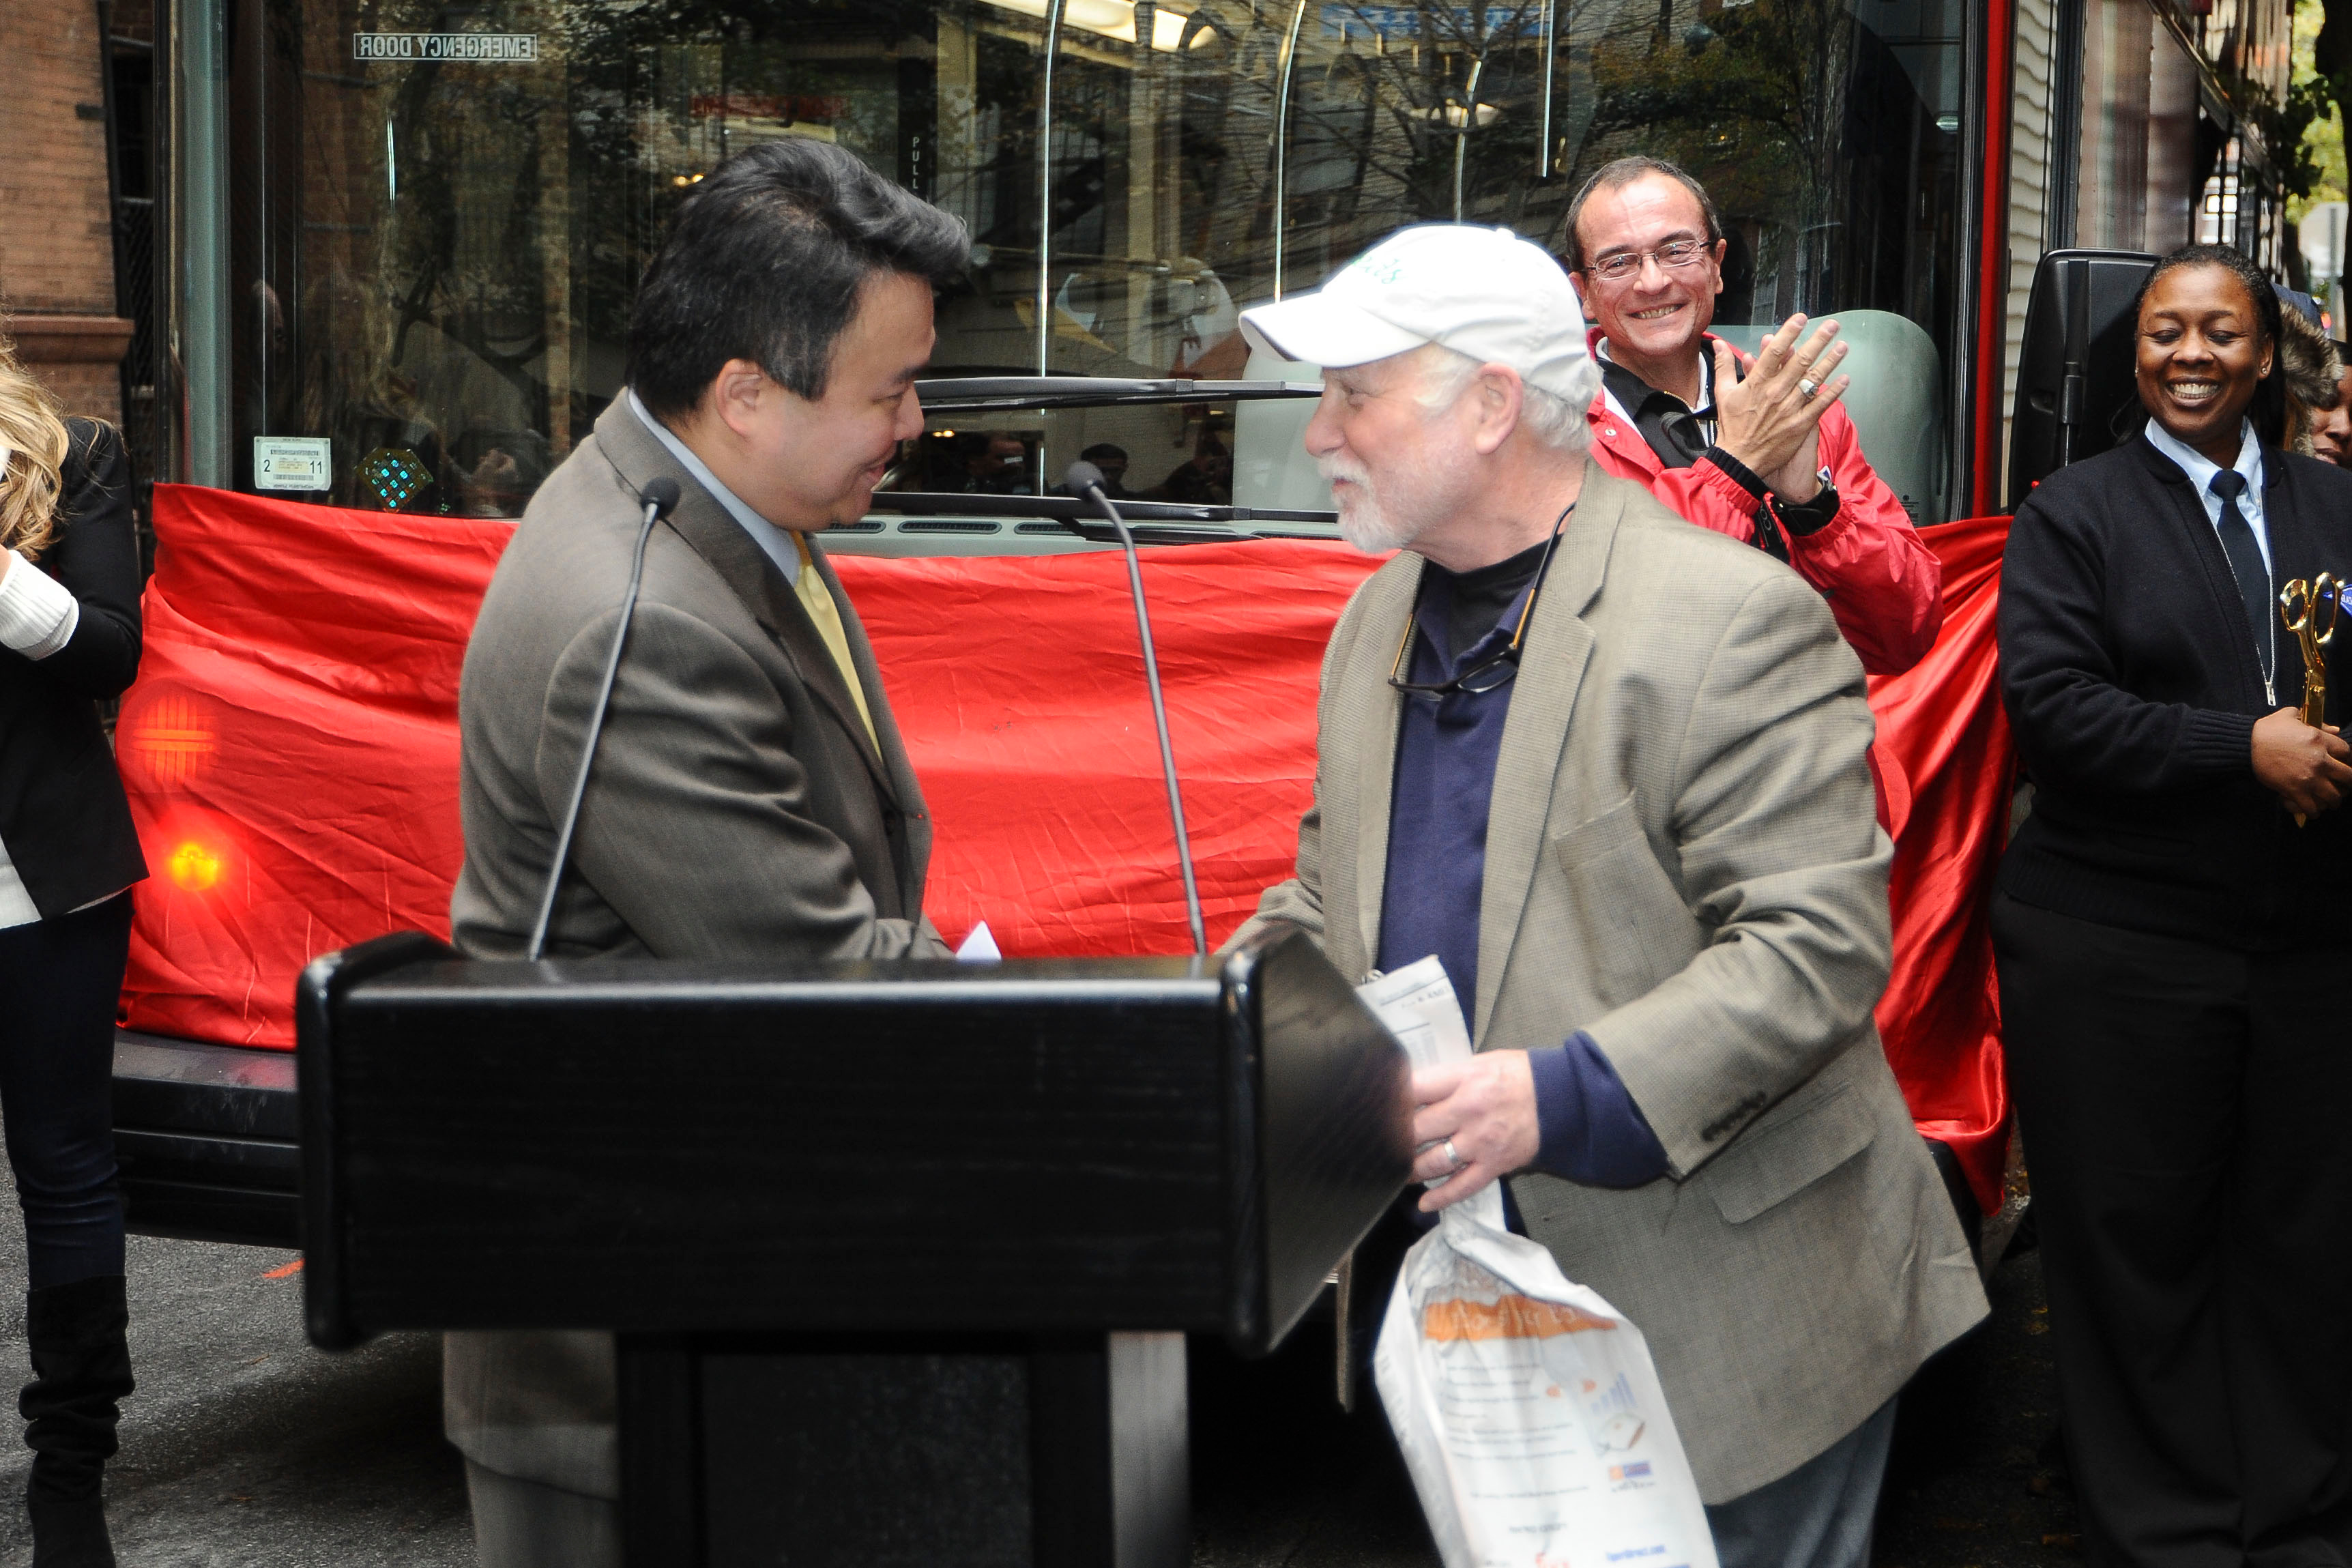 David W. Chien with Ride of Fame Honoree Richard Dreyfuss (November 5th, 2010).